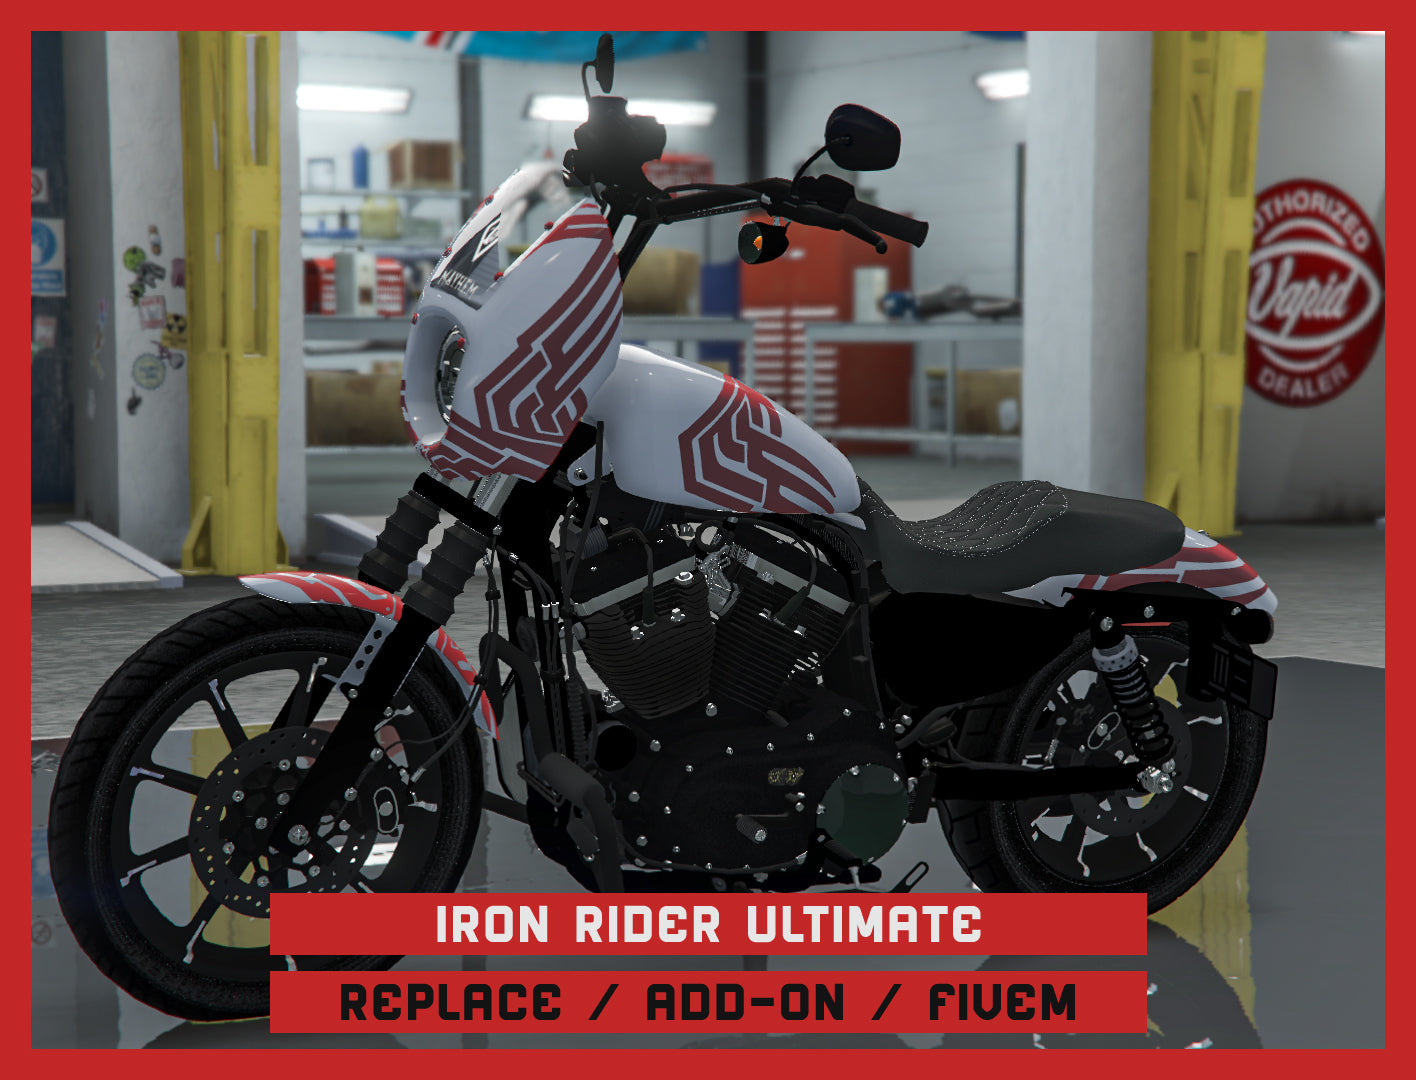 Iron Rider Ultimate (Replace / Add On / FiveM) 189k Poly